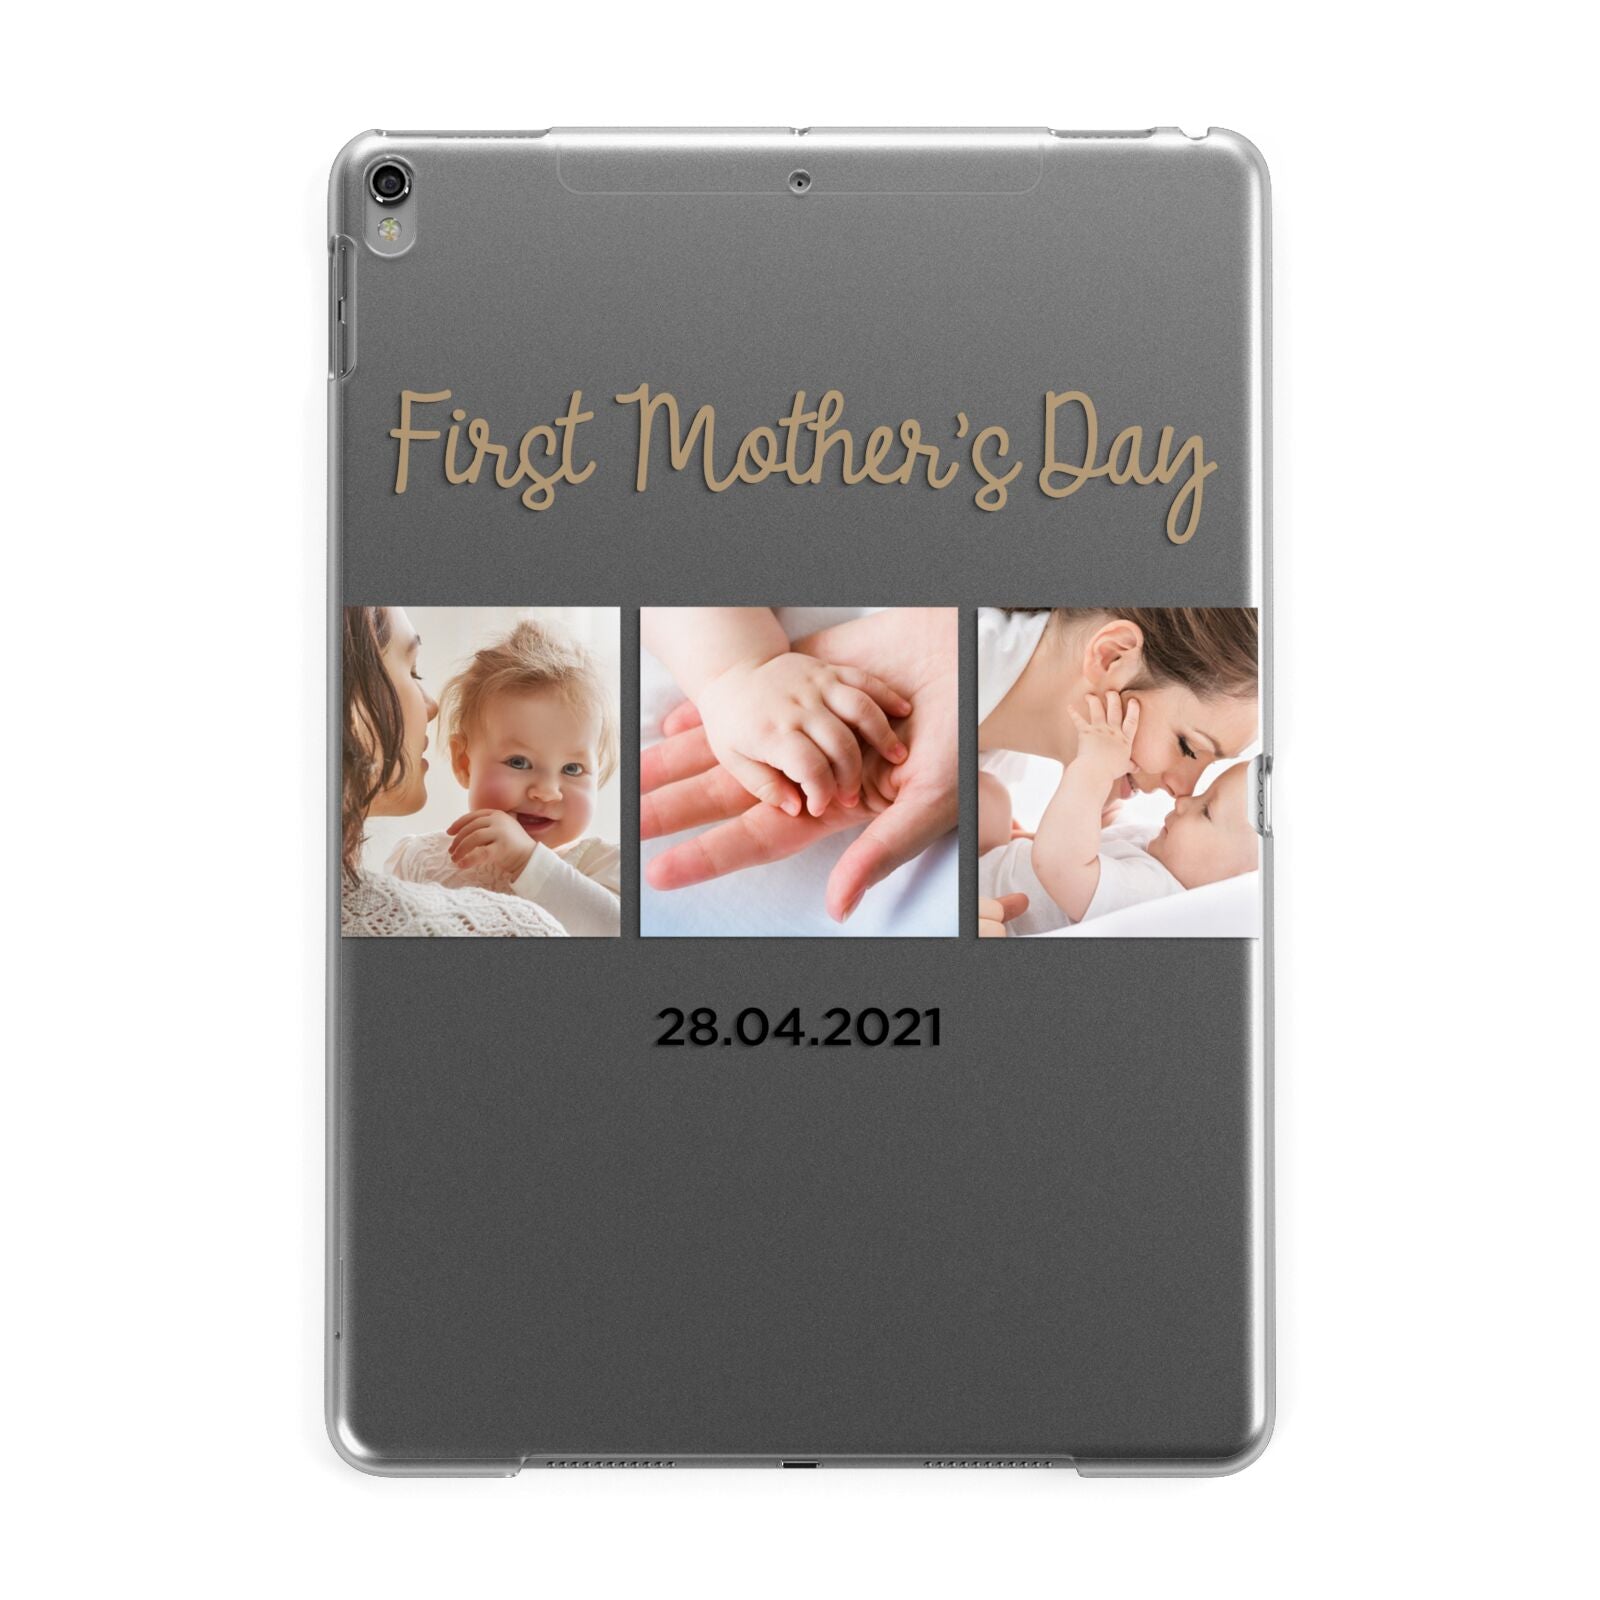 First Mothers Day Photo Apple iPad Grey Case